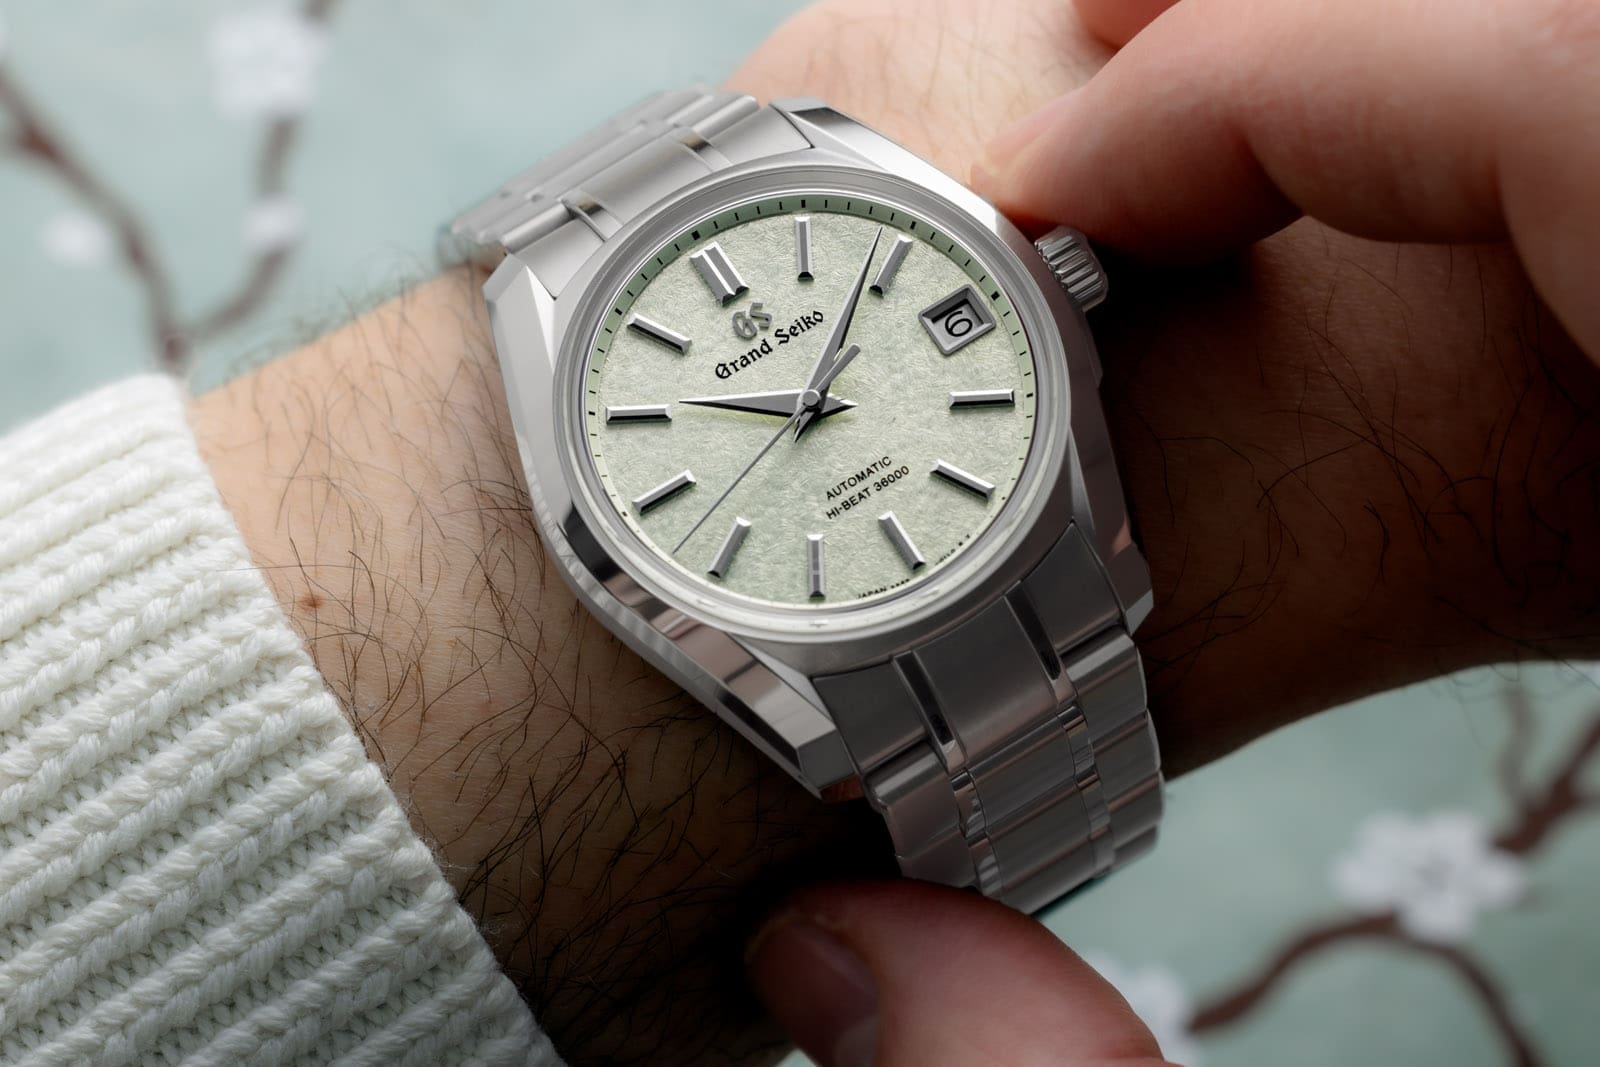 The new Grand Seiko SBGH341 & SBGH343 debut the modern 62GS case in a new 38mm size